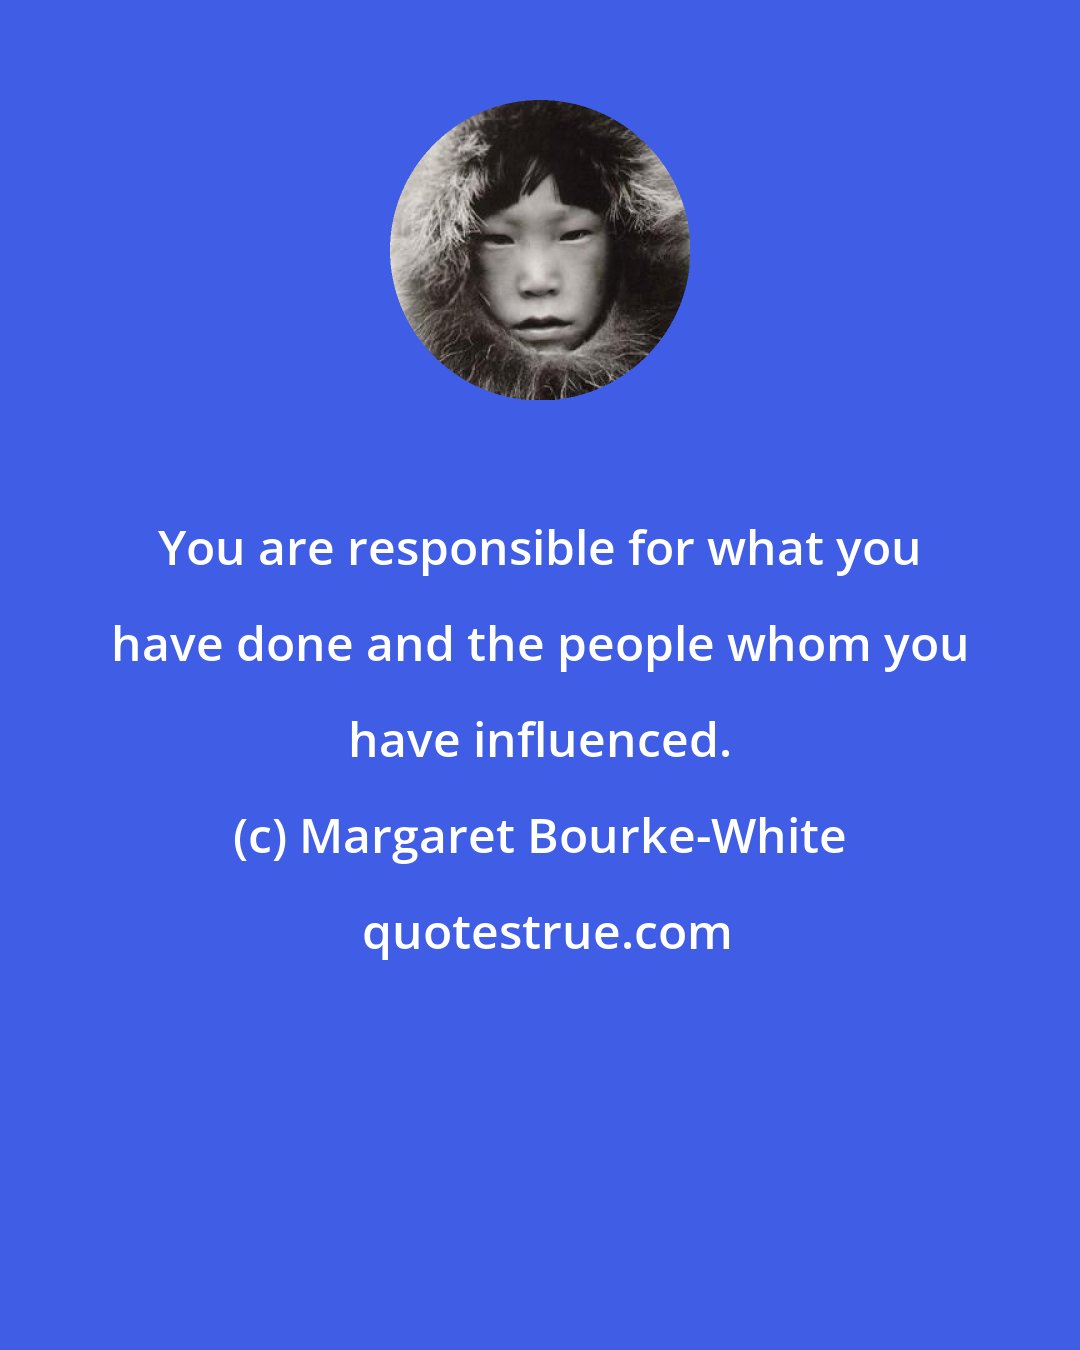 Margaret Bourke-White: You are responsible for what you have done and the people whom you have influenced.